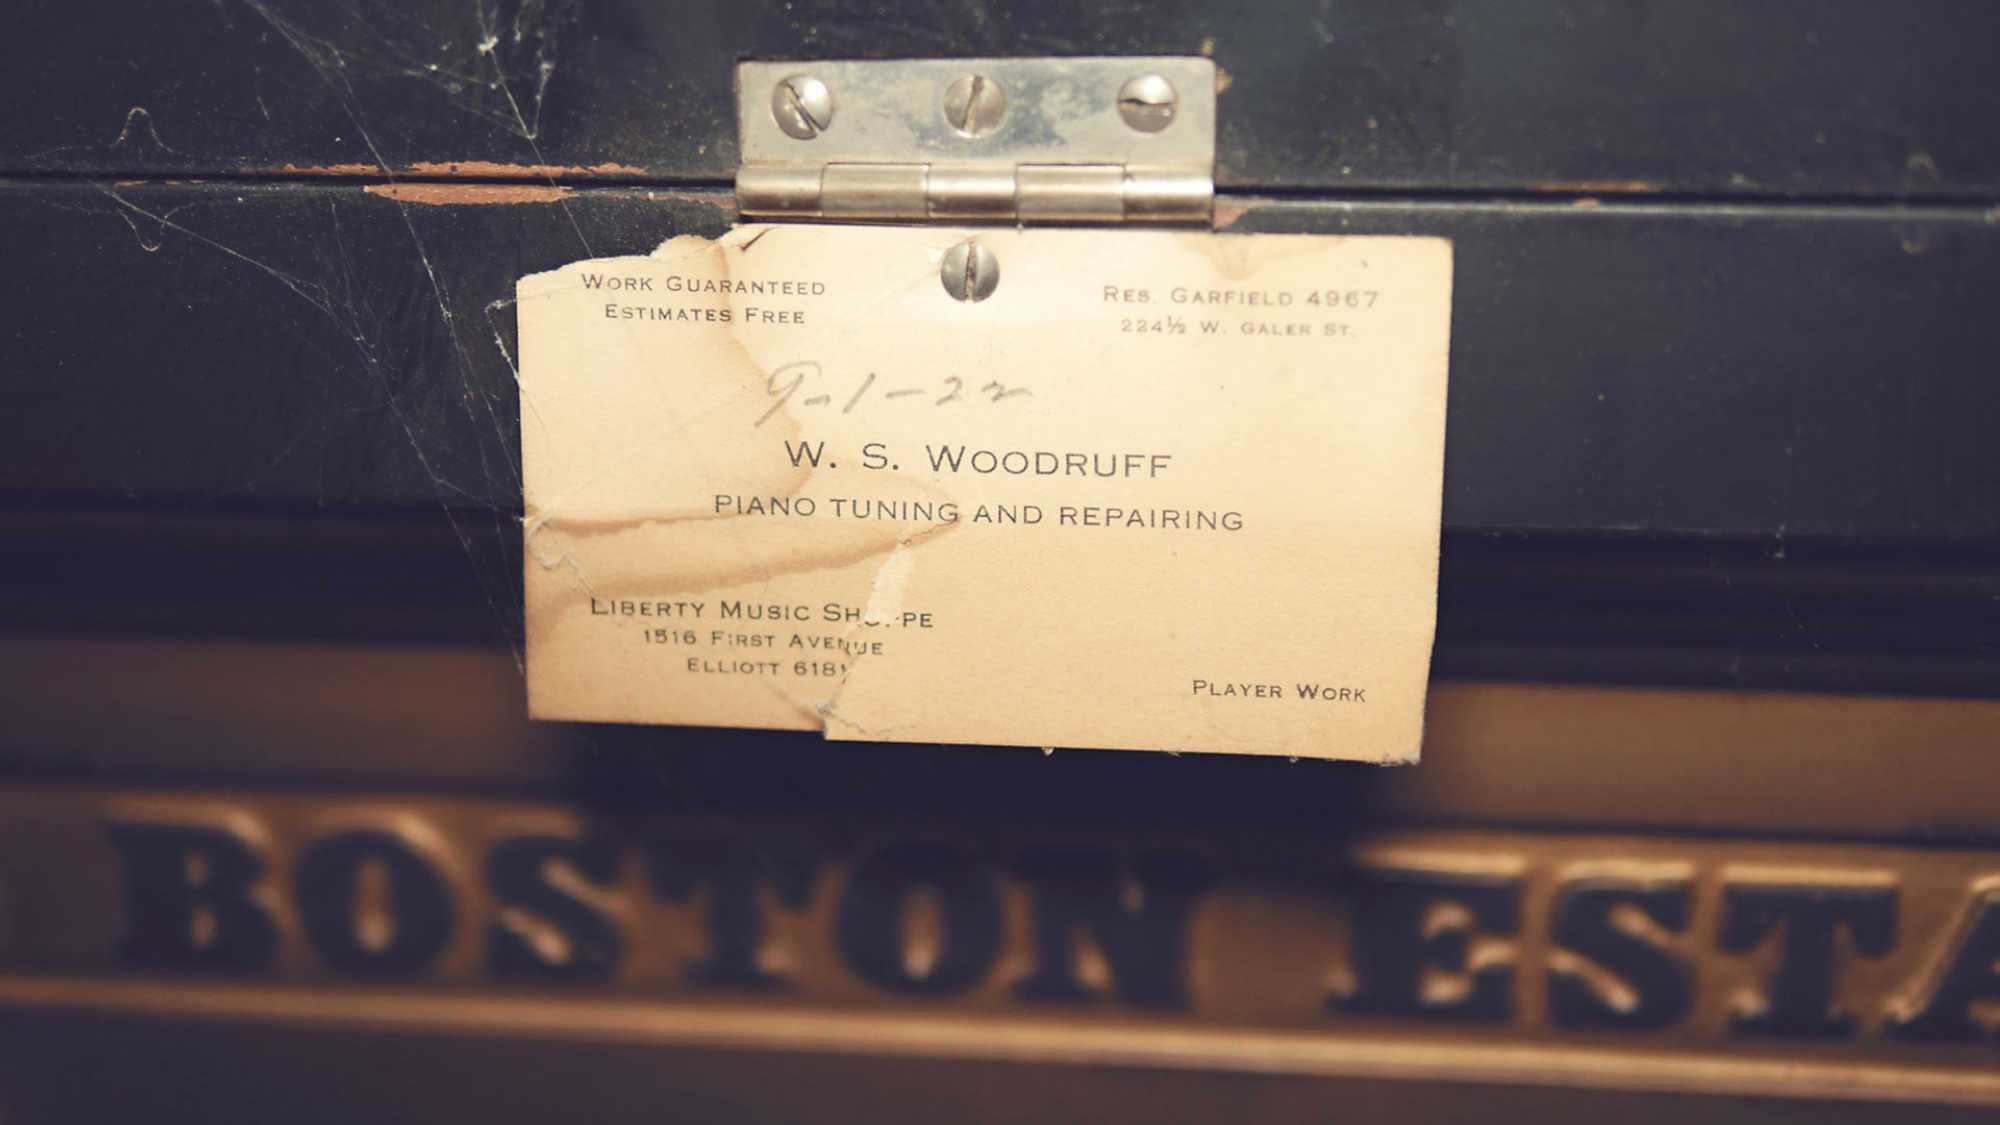 A piano tuner's card from 1922 stapled to the inside of piano.